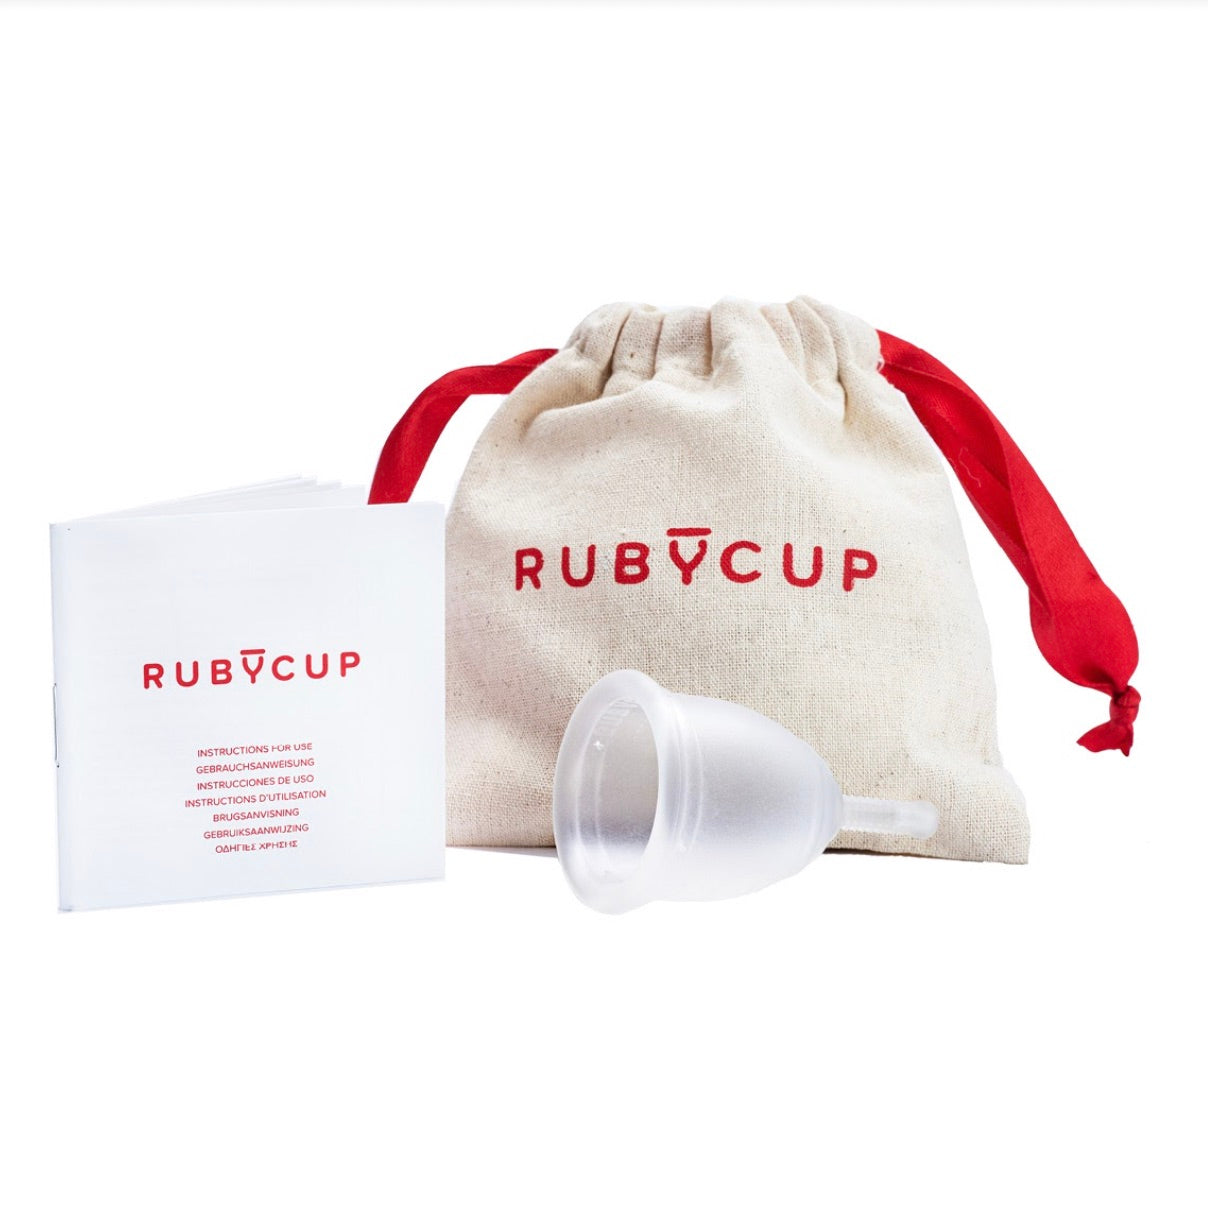 Ruby Cup menstrual cup in clear